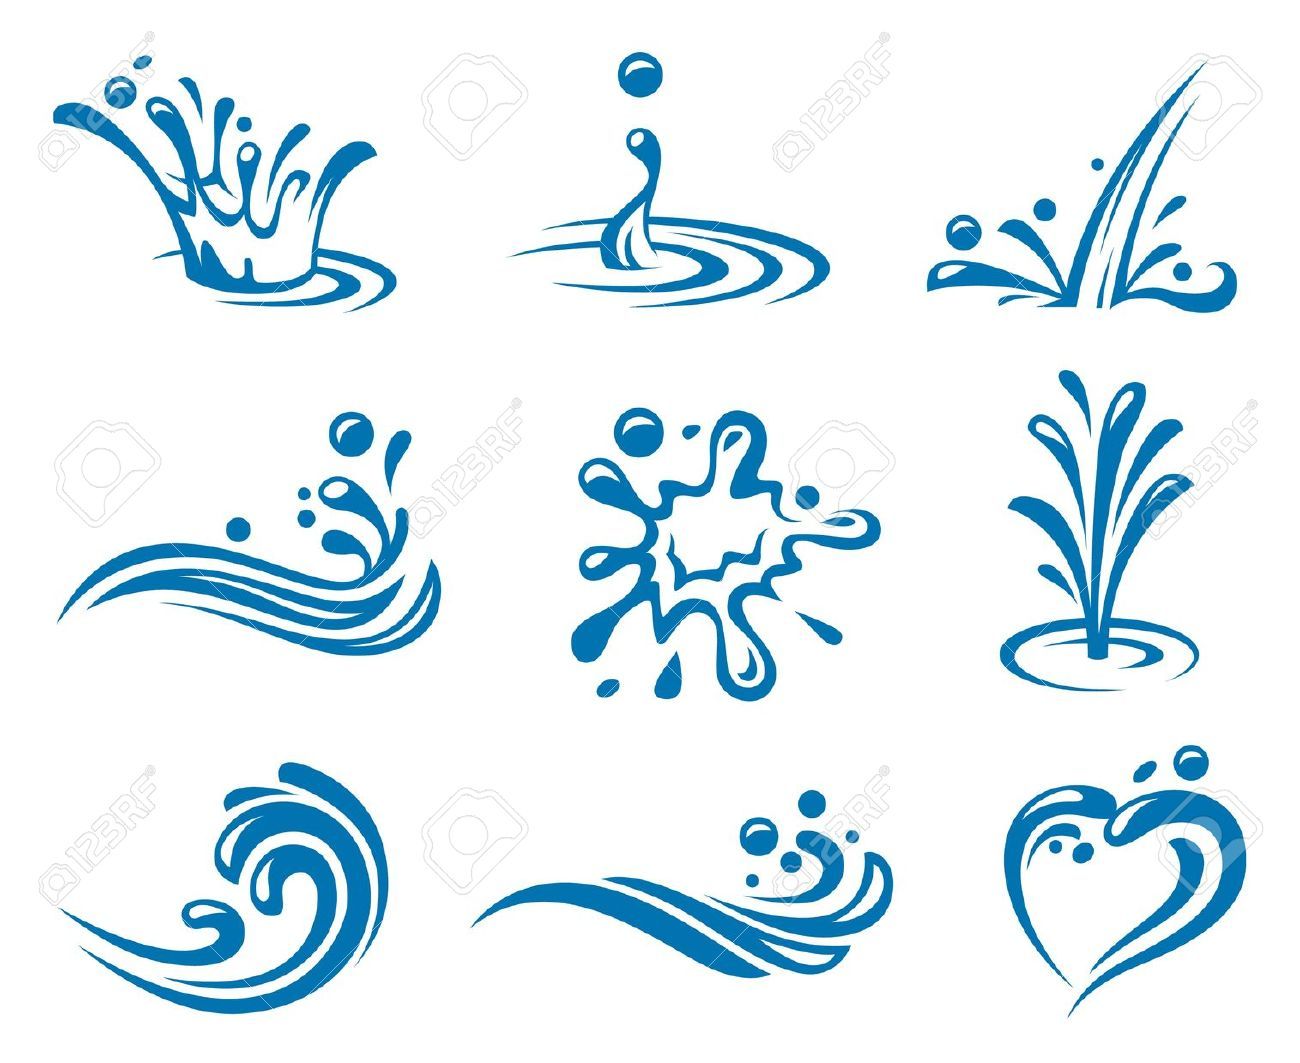 Water Wave Splash Stock Vector Illustration And Royalty Free